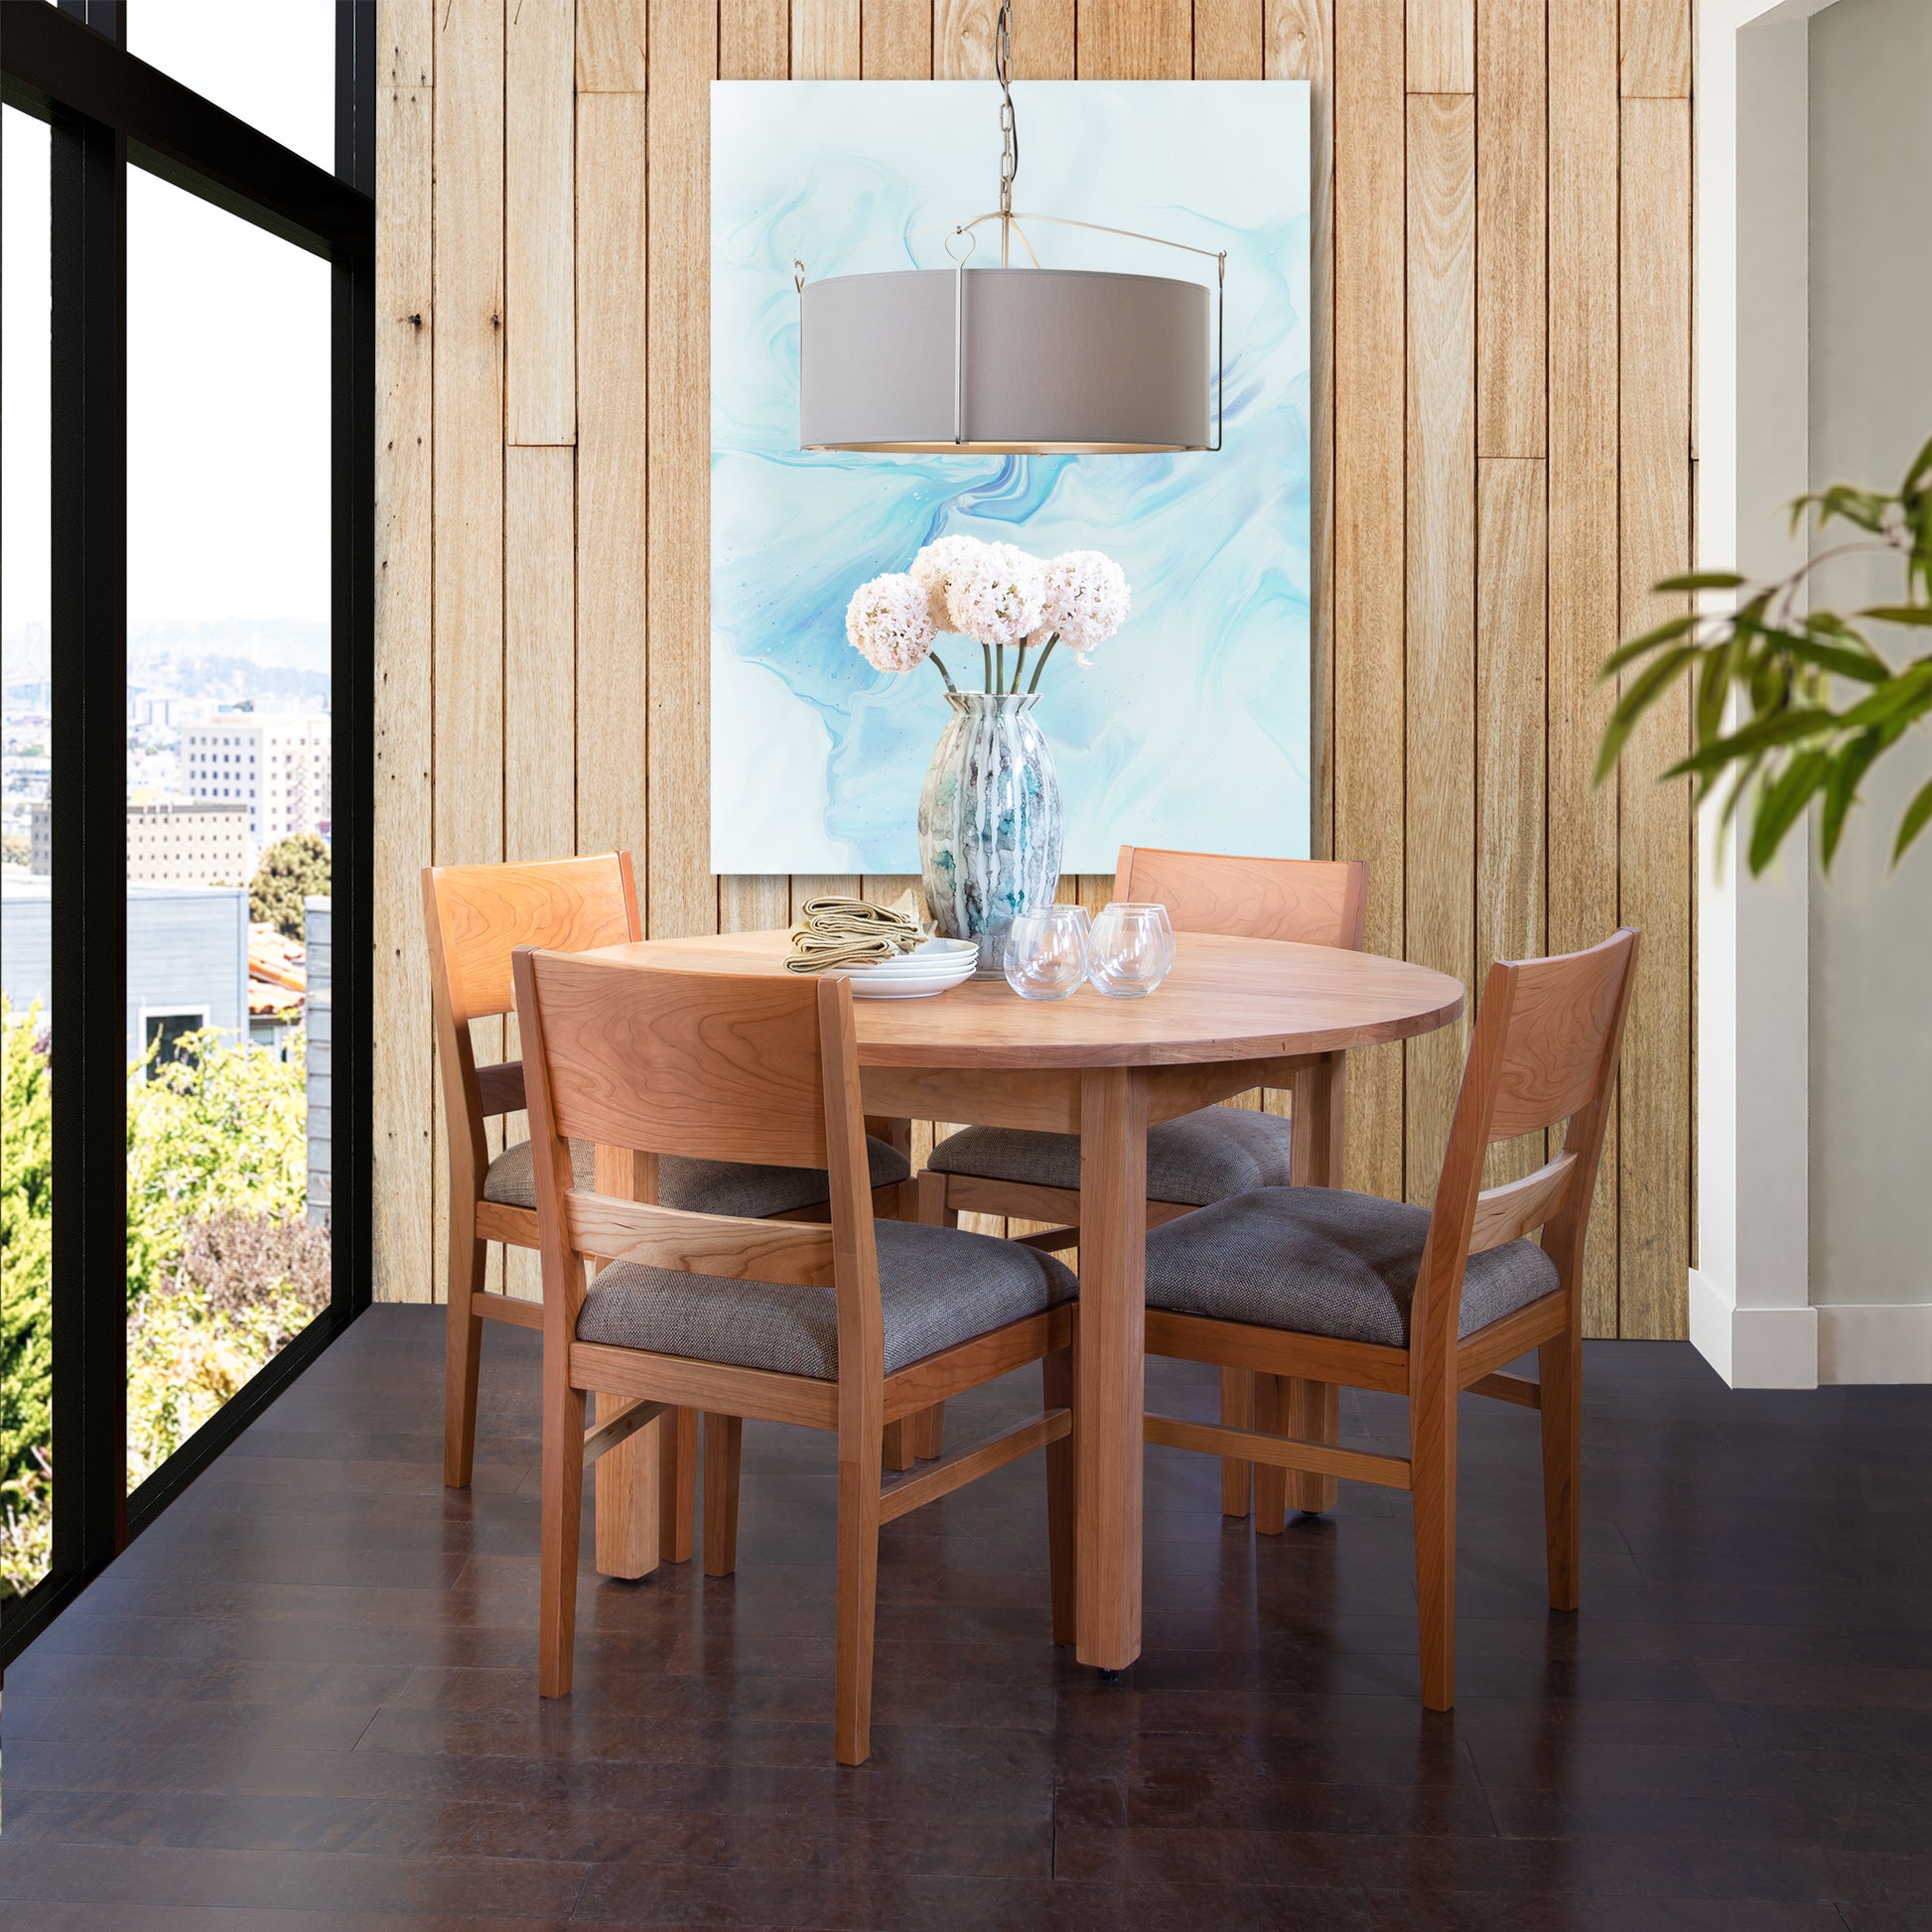 A modern dining area featuring a Vermont Furniture Designs Burlington Shaker Round Solid Top Dining Table with matching chairs, set against a backdrop of a cityscape view and a large blue art piece above the table.